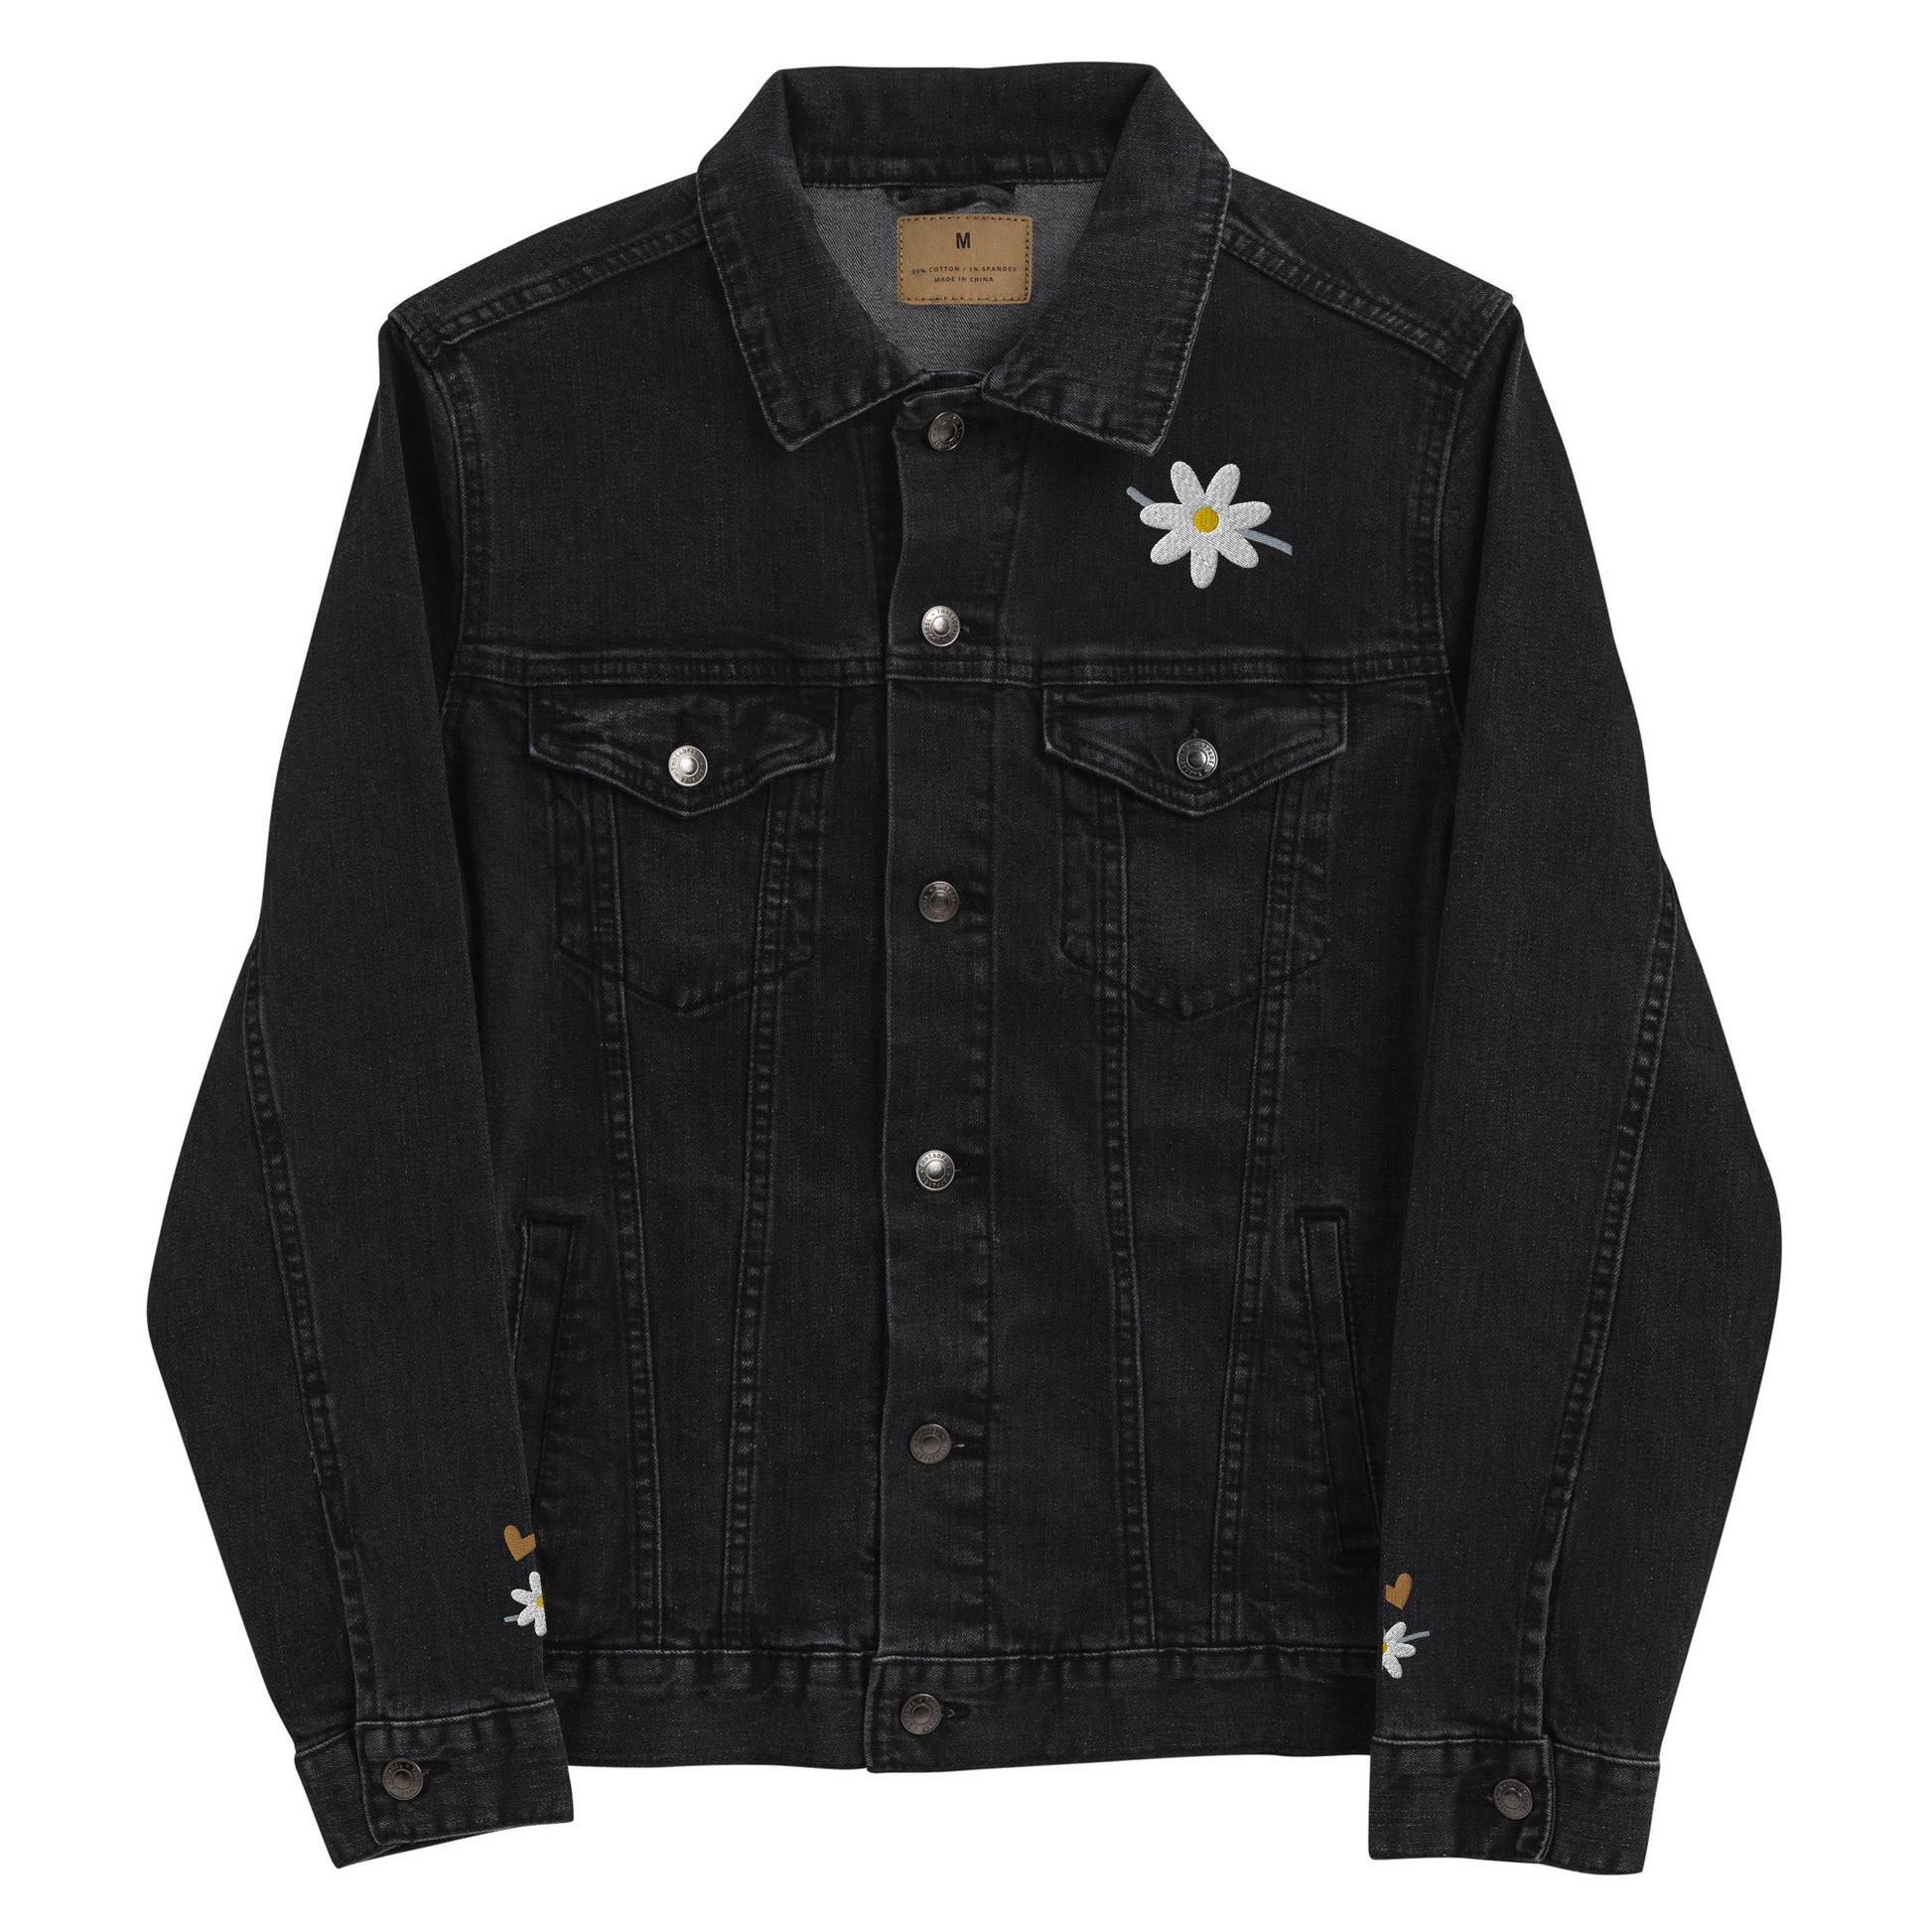 Front view of a black denim jacket with white daisy embroidered on front left lapel area and at lower part of each sleeve, along with a small gold embroidered heart on each sleeve by the daisy.